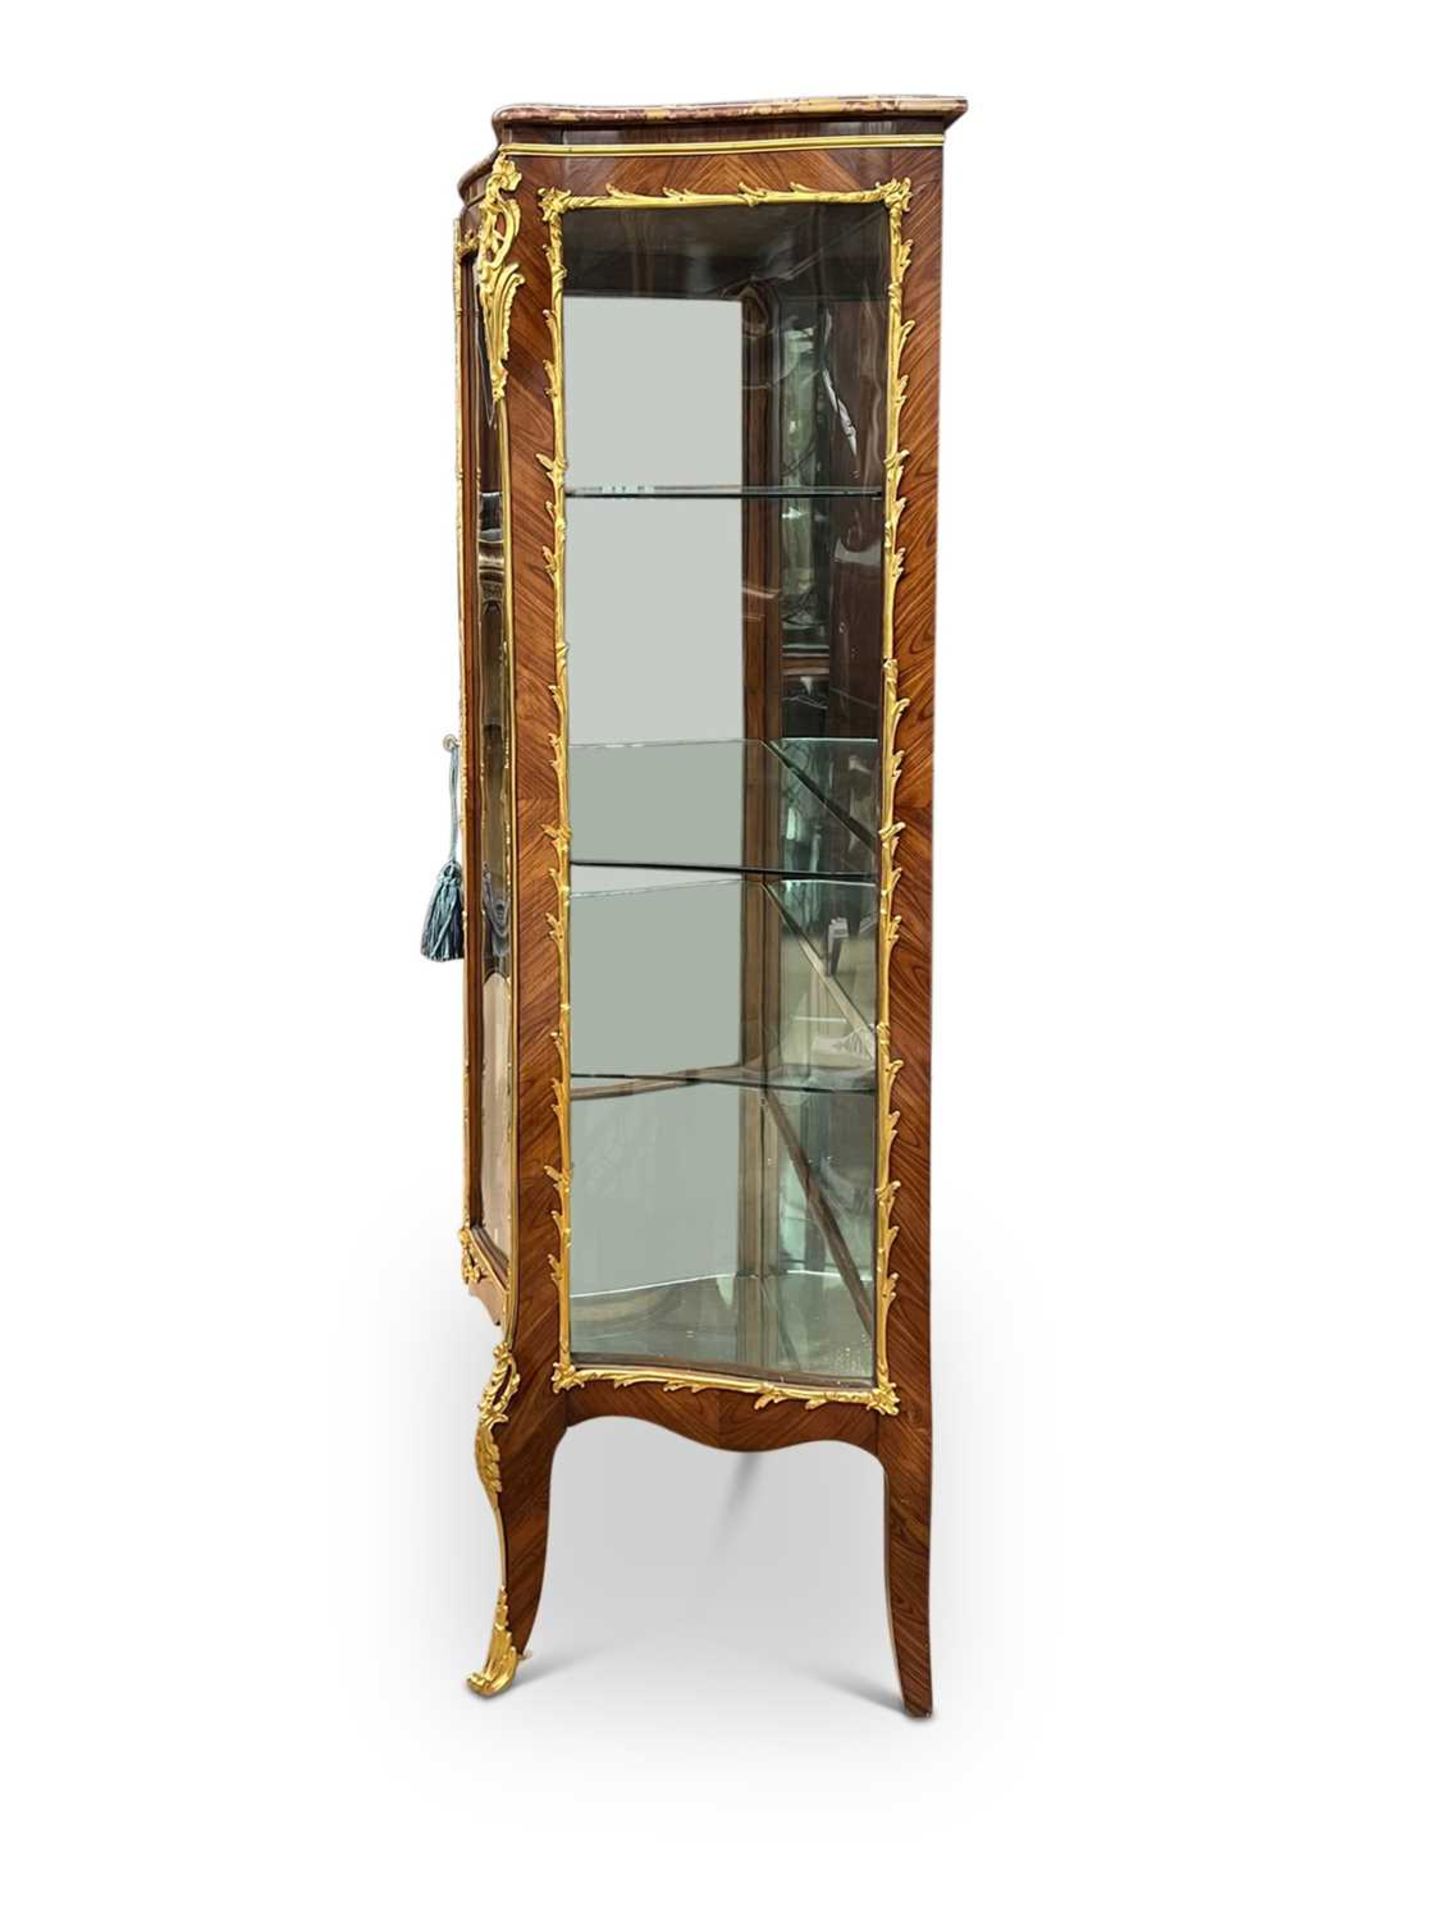 A FINE LATE 19TH CENTURY KINGWOOD AND ORMOLU SERPENTINE VITRINE RETAILED BY JAMES SHOOLBRED - Image 2 of 5